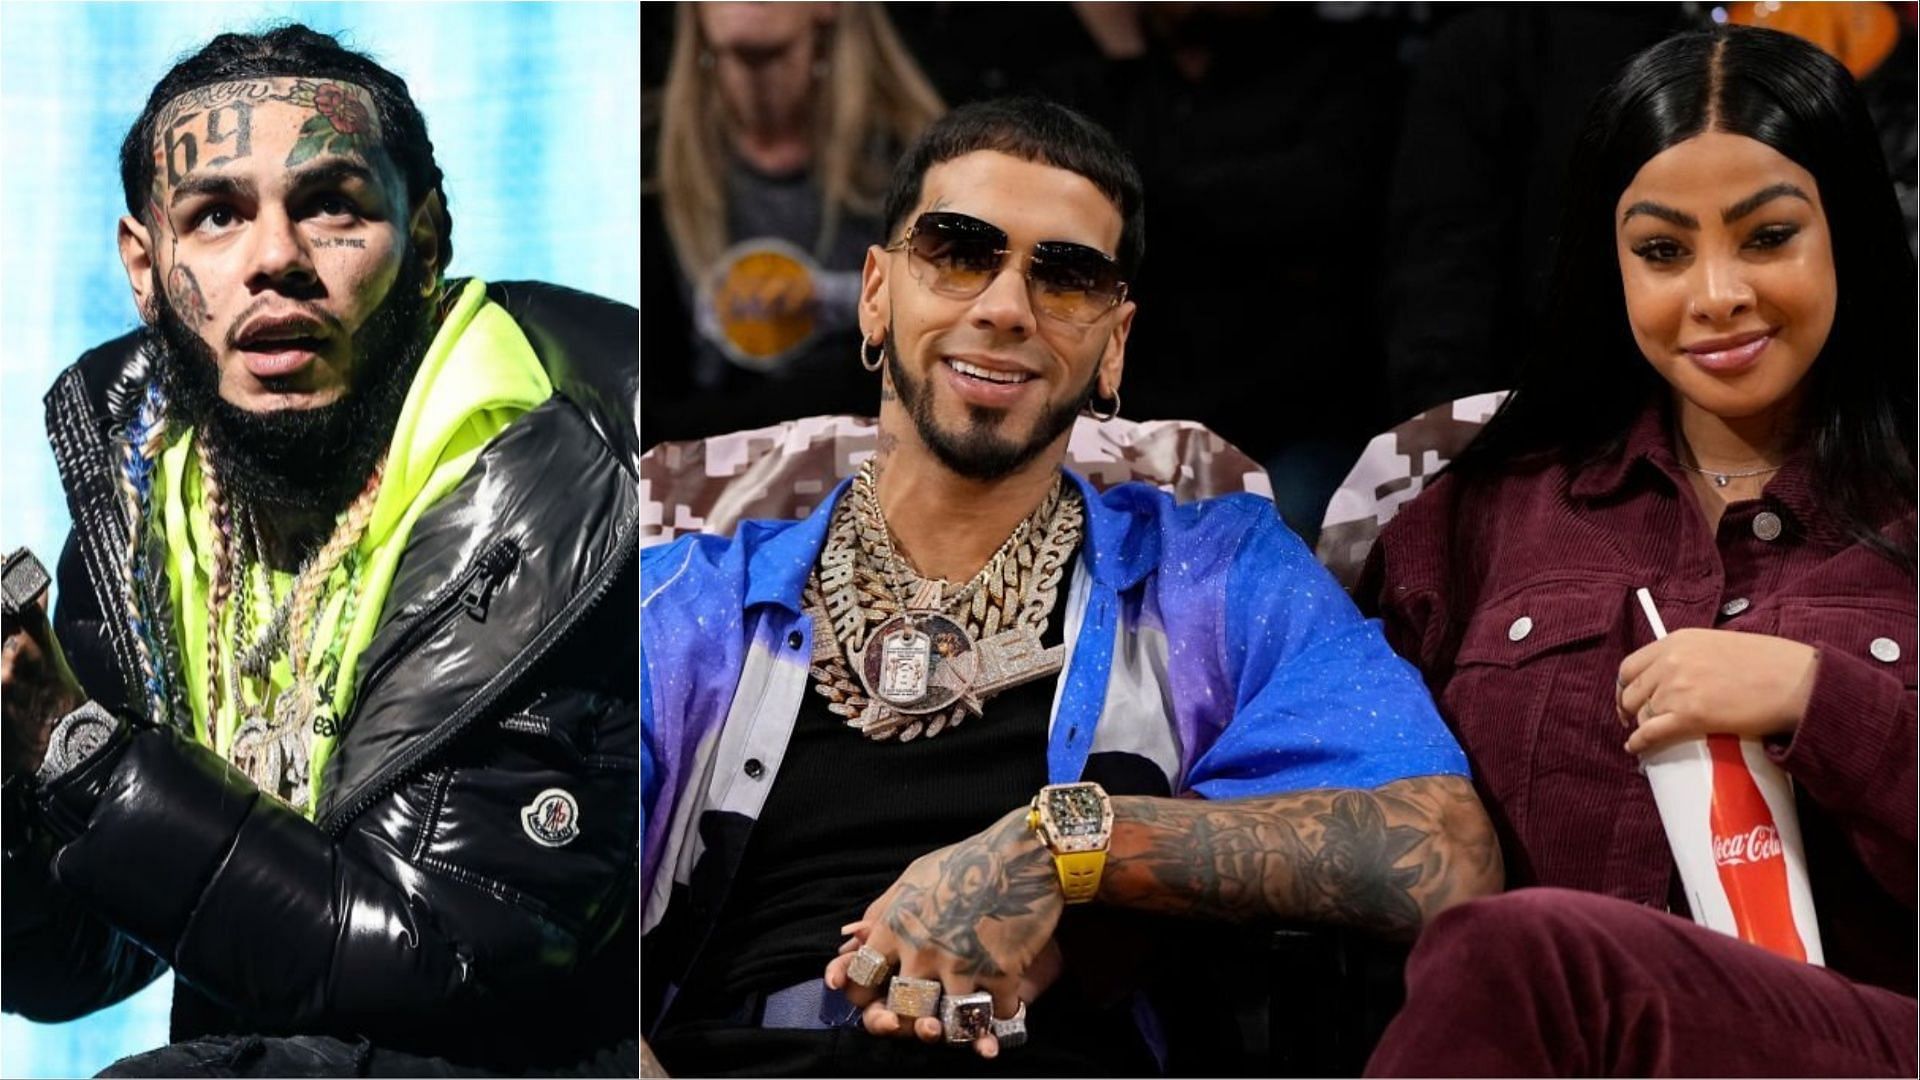 Yailin La Mas Viral has accused Anuel AA of domestic abuse as the latter gets engaged in an online beef with 6ix9ine (Images via John Parra and Kervork Djansezian/Getty Images)